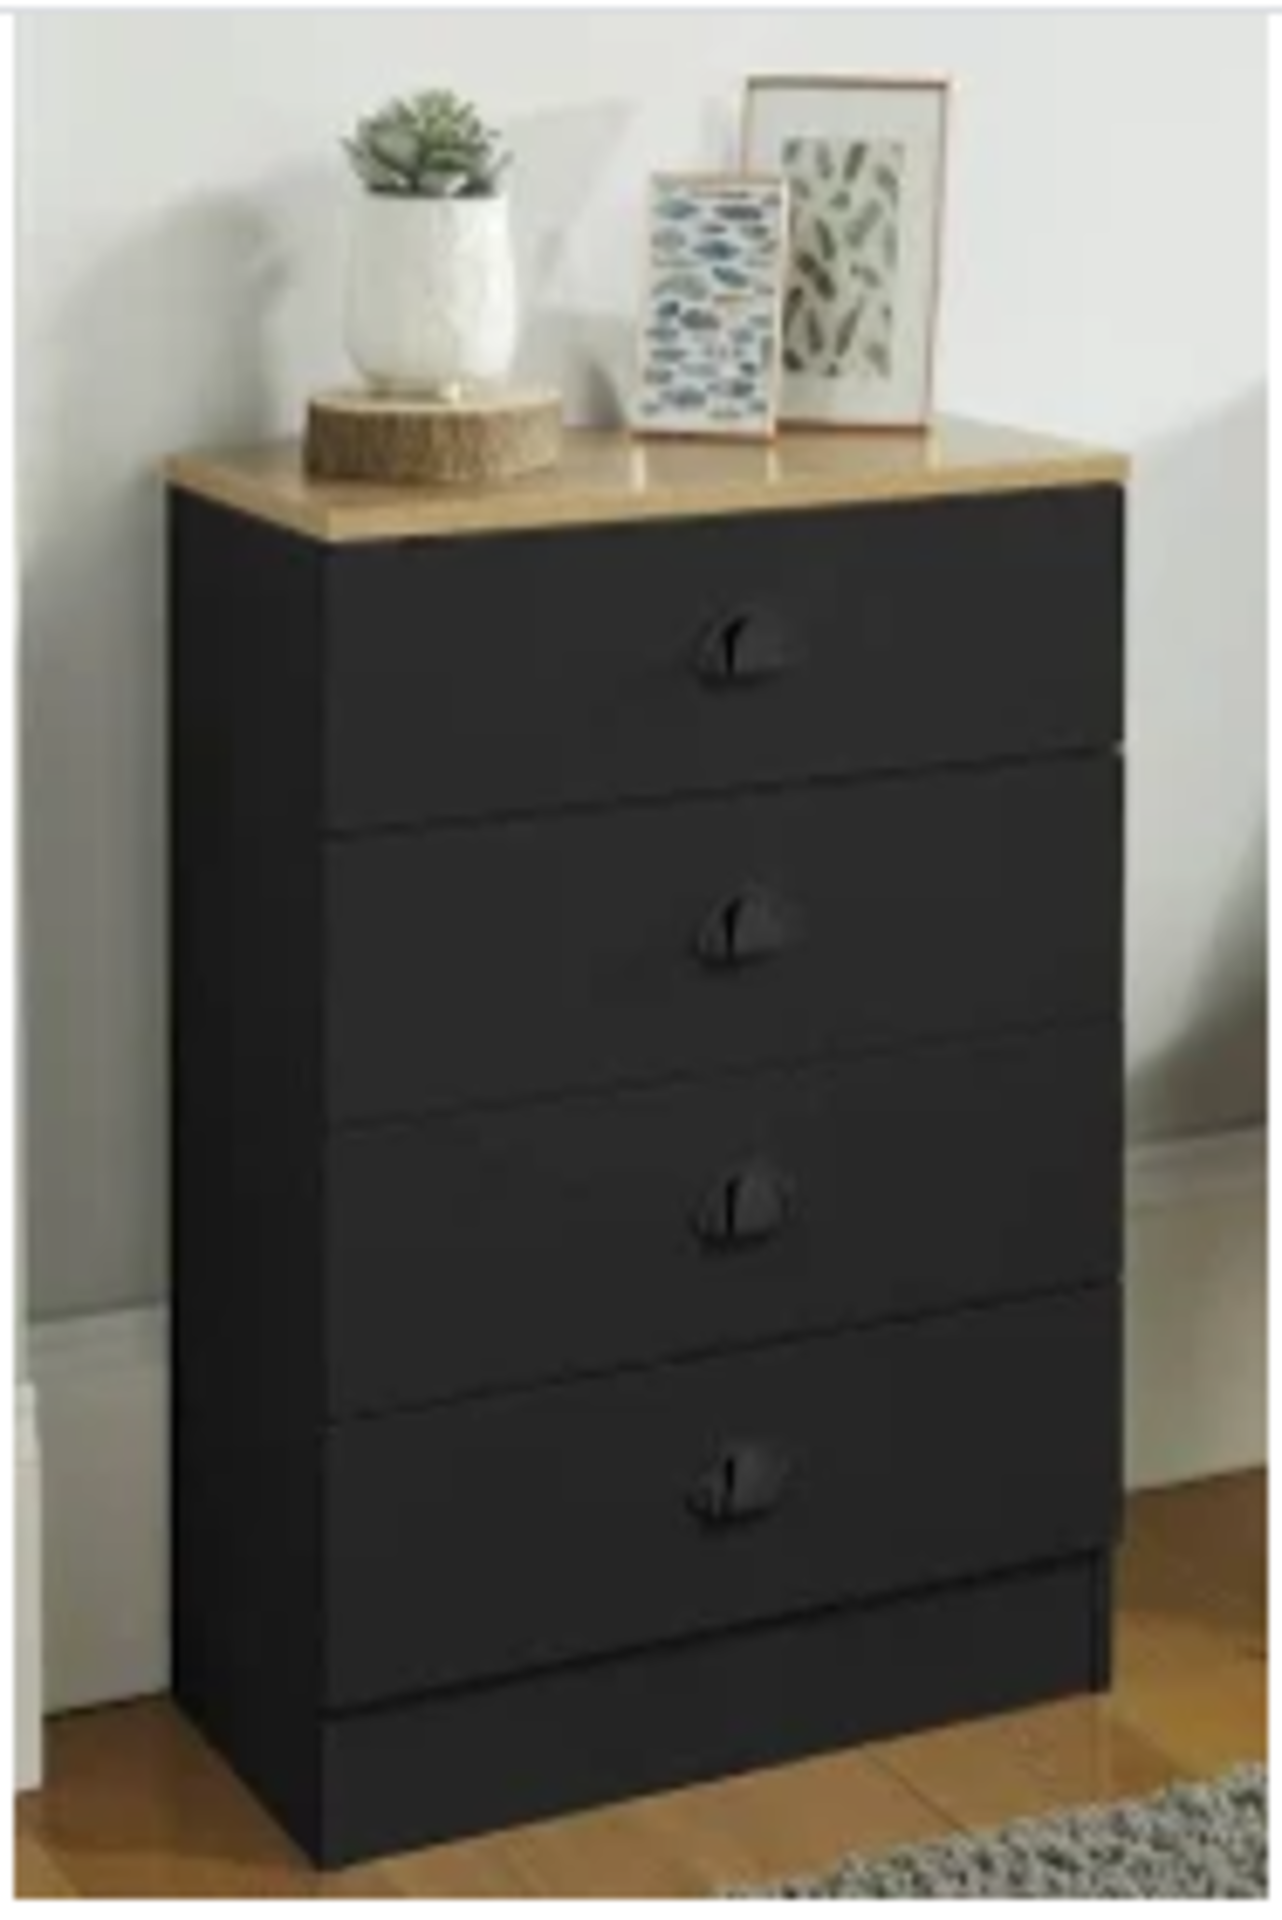 Lilsbury Black 4 Drawer Bedroom Chest of Drawers. RRP £140.00. - SR3. Boasting a classic design, the